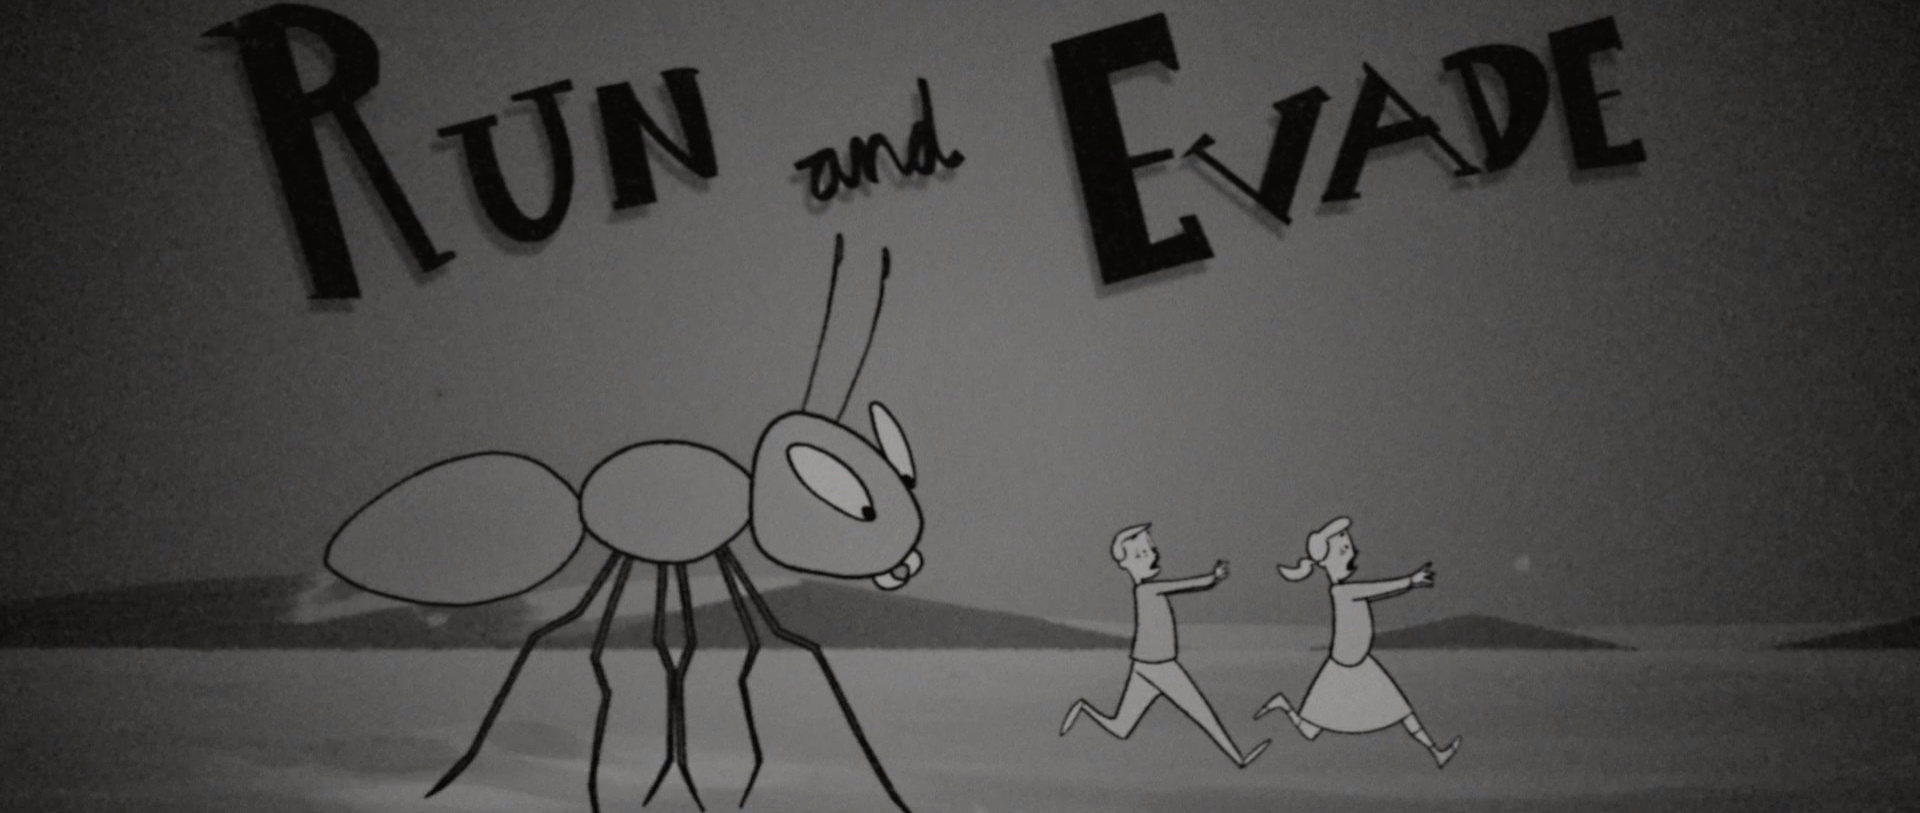 Were only there a Vault Boy to give this mutant ant a wink and a thumbs-up